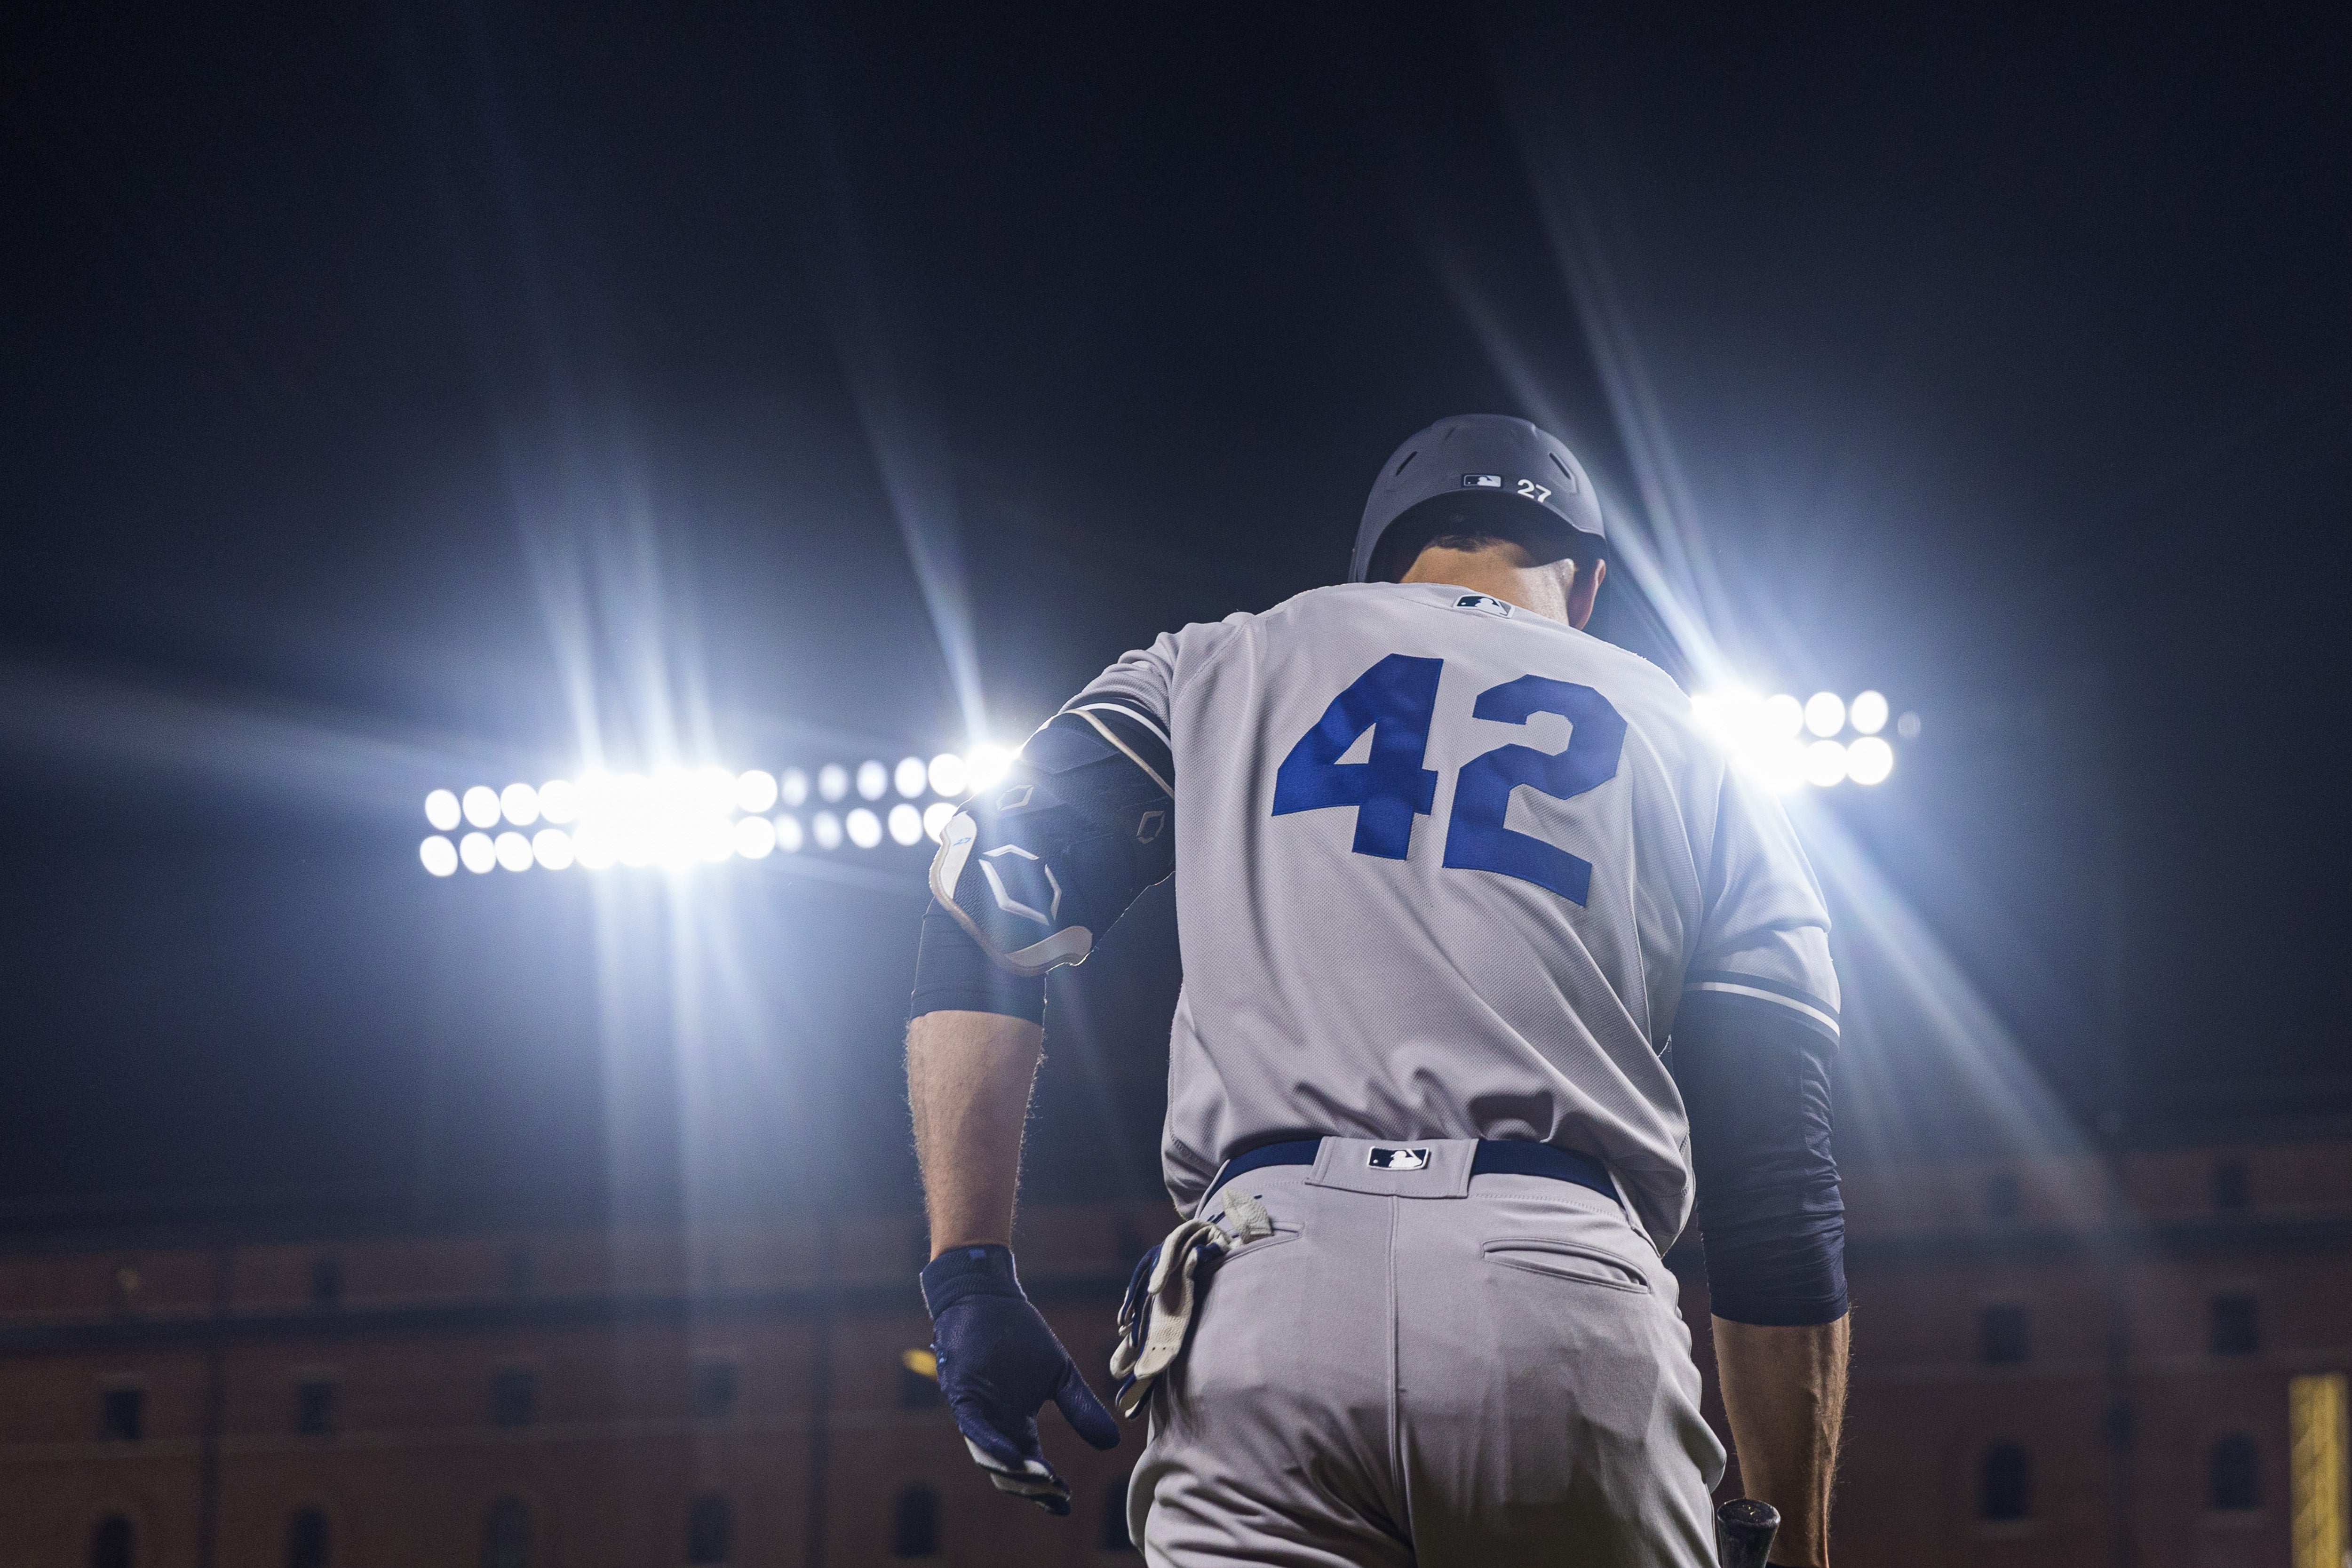 Player wearing #42 in honor of Jackie Robinson